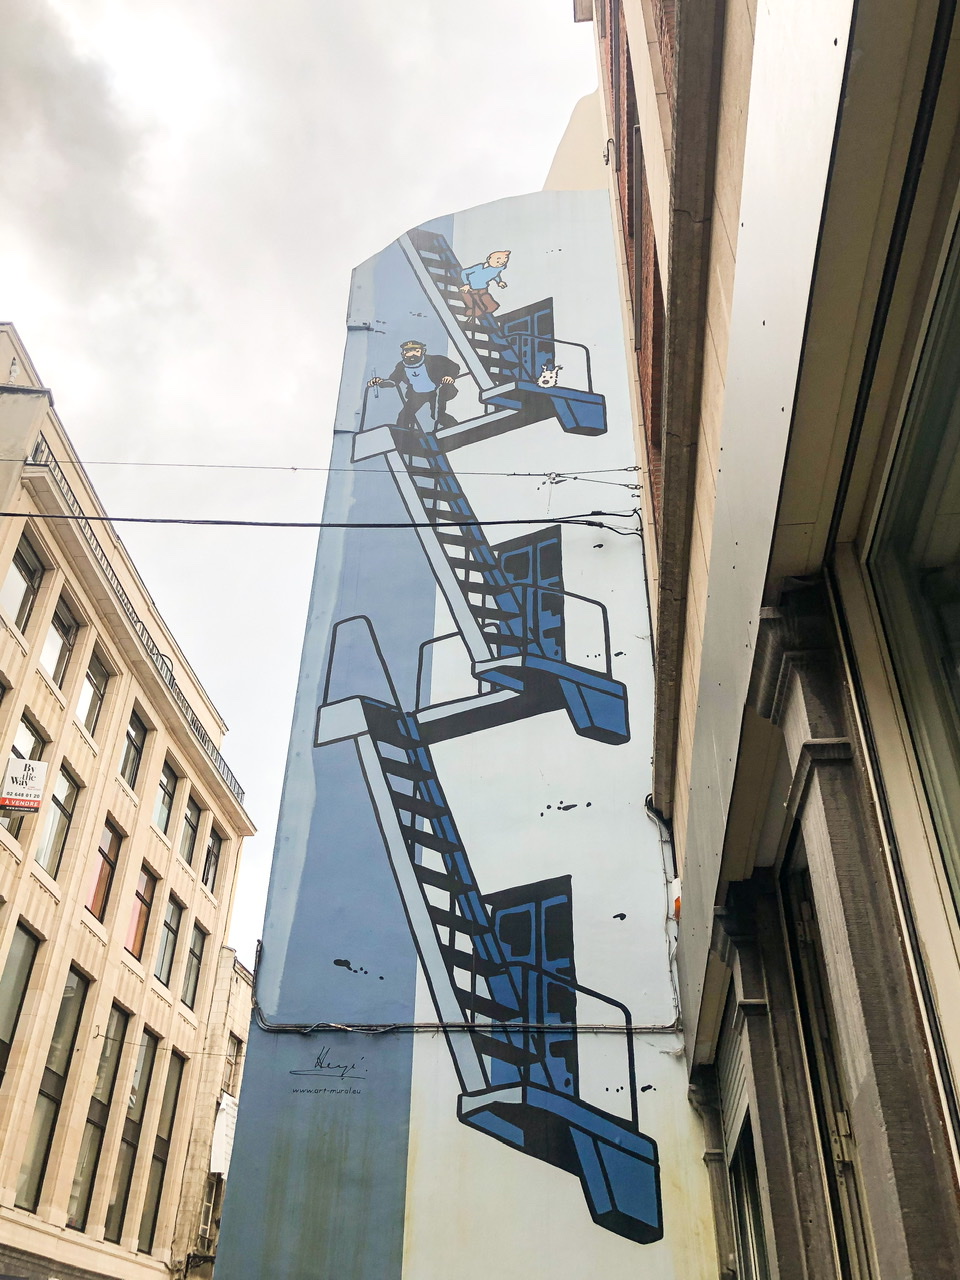 Wall in Brussels painted with and three characters from Asterix comics on stairs